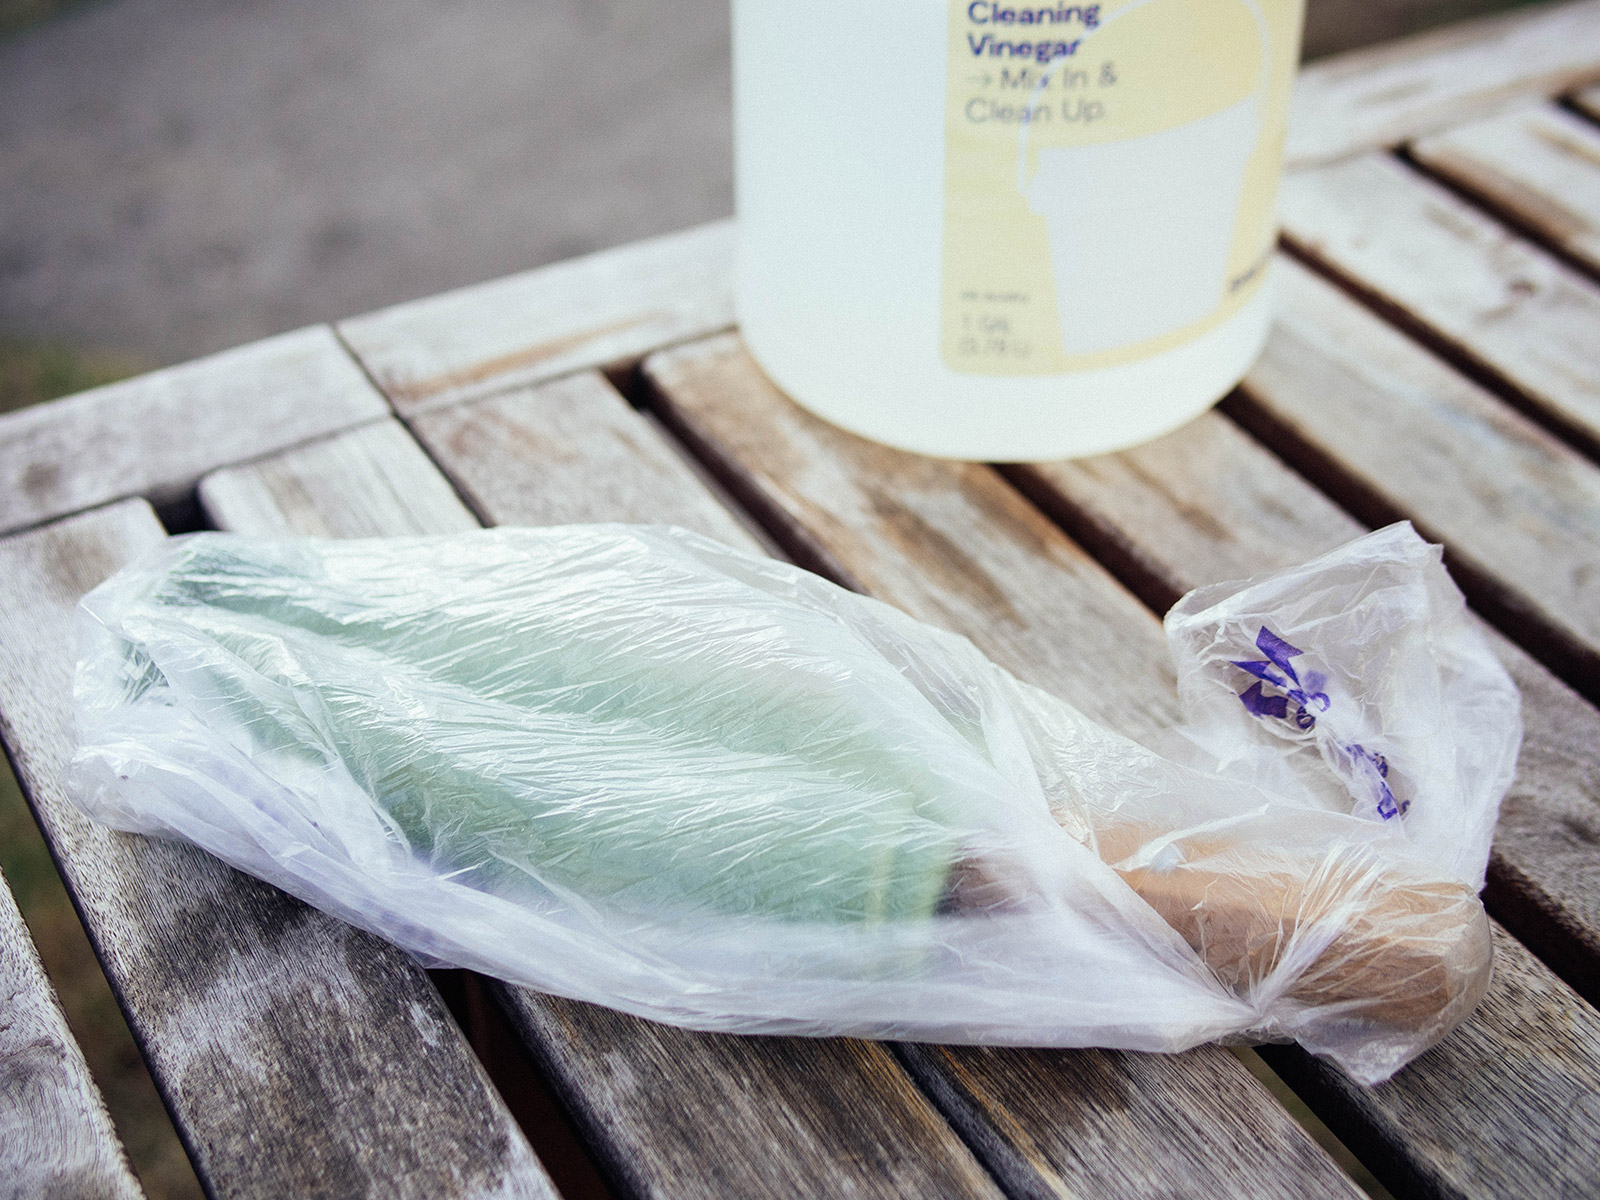 A hand tool wrapped in a green vinegar-soaked towel and placed inside a plastic bag for rust removal